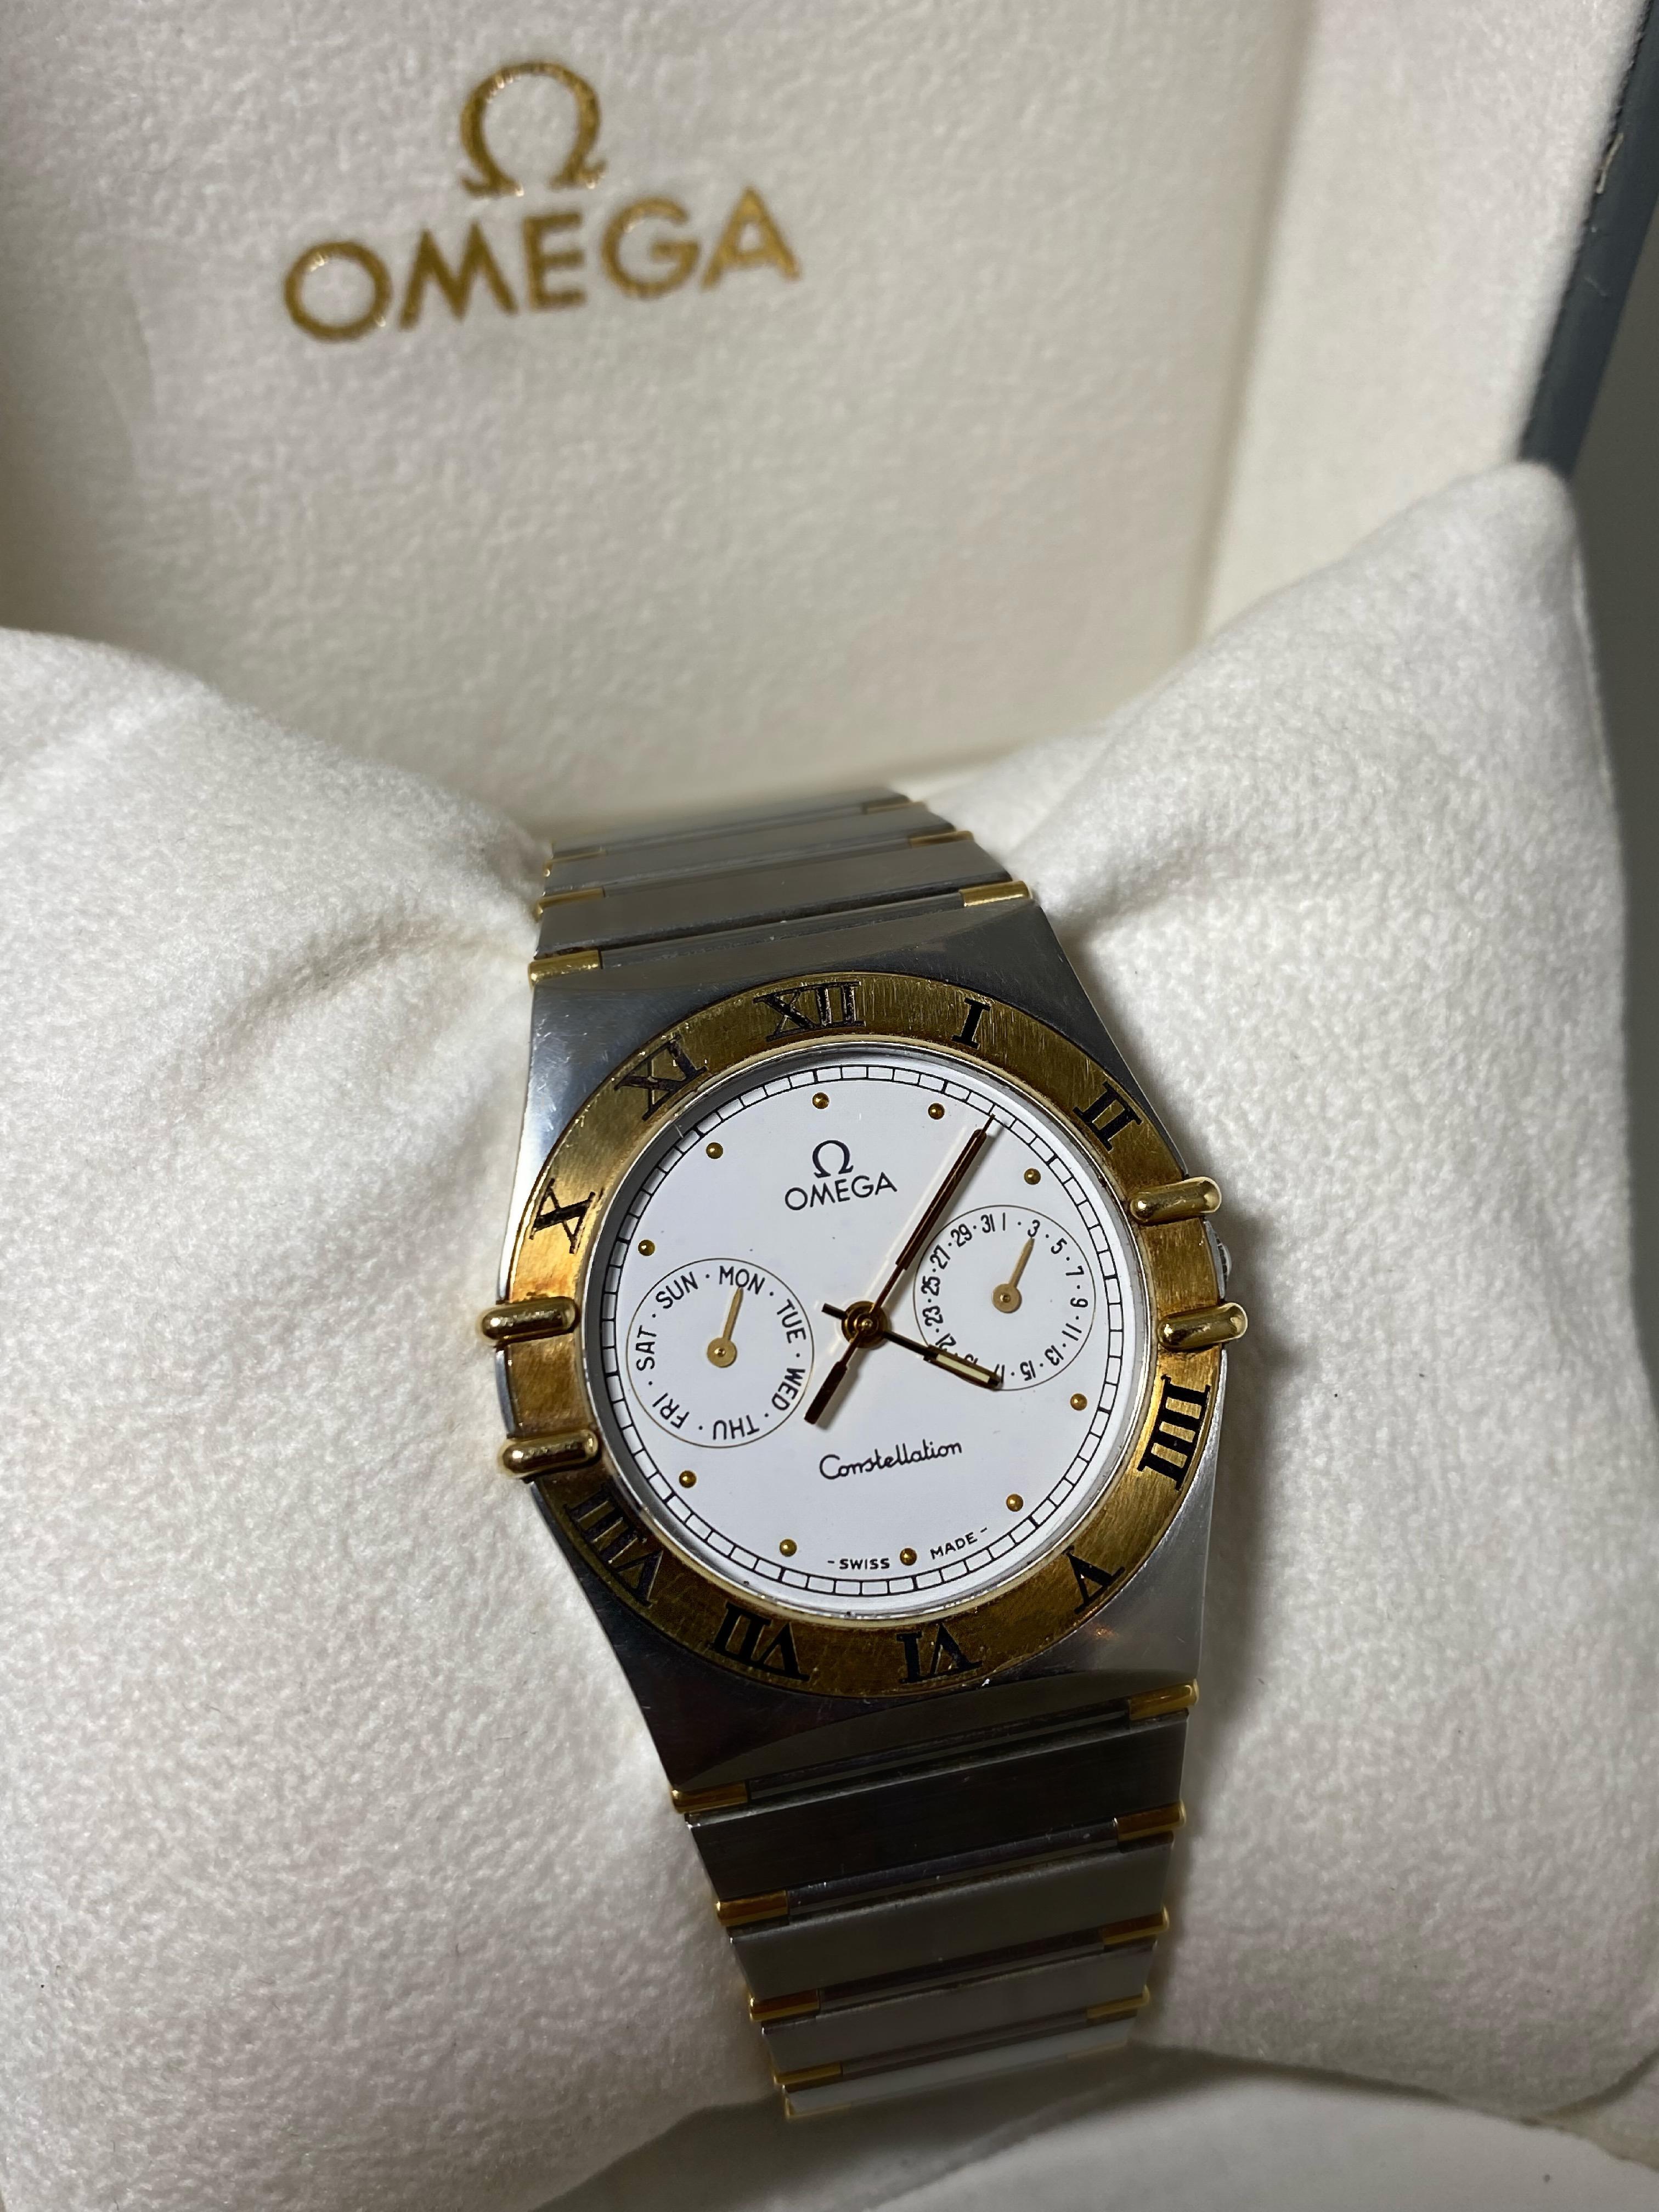 Men's Omega Constellation Gold Steel Watch ref 396/1080, Day Date. Box, Papers, Links. For Sale